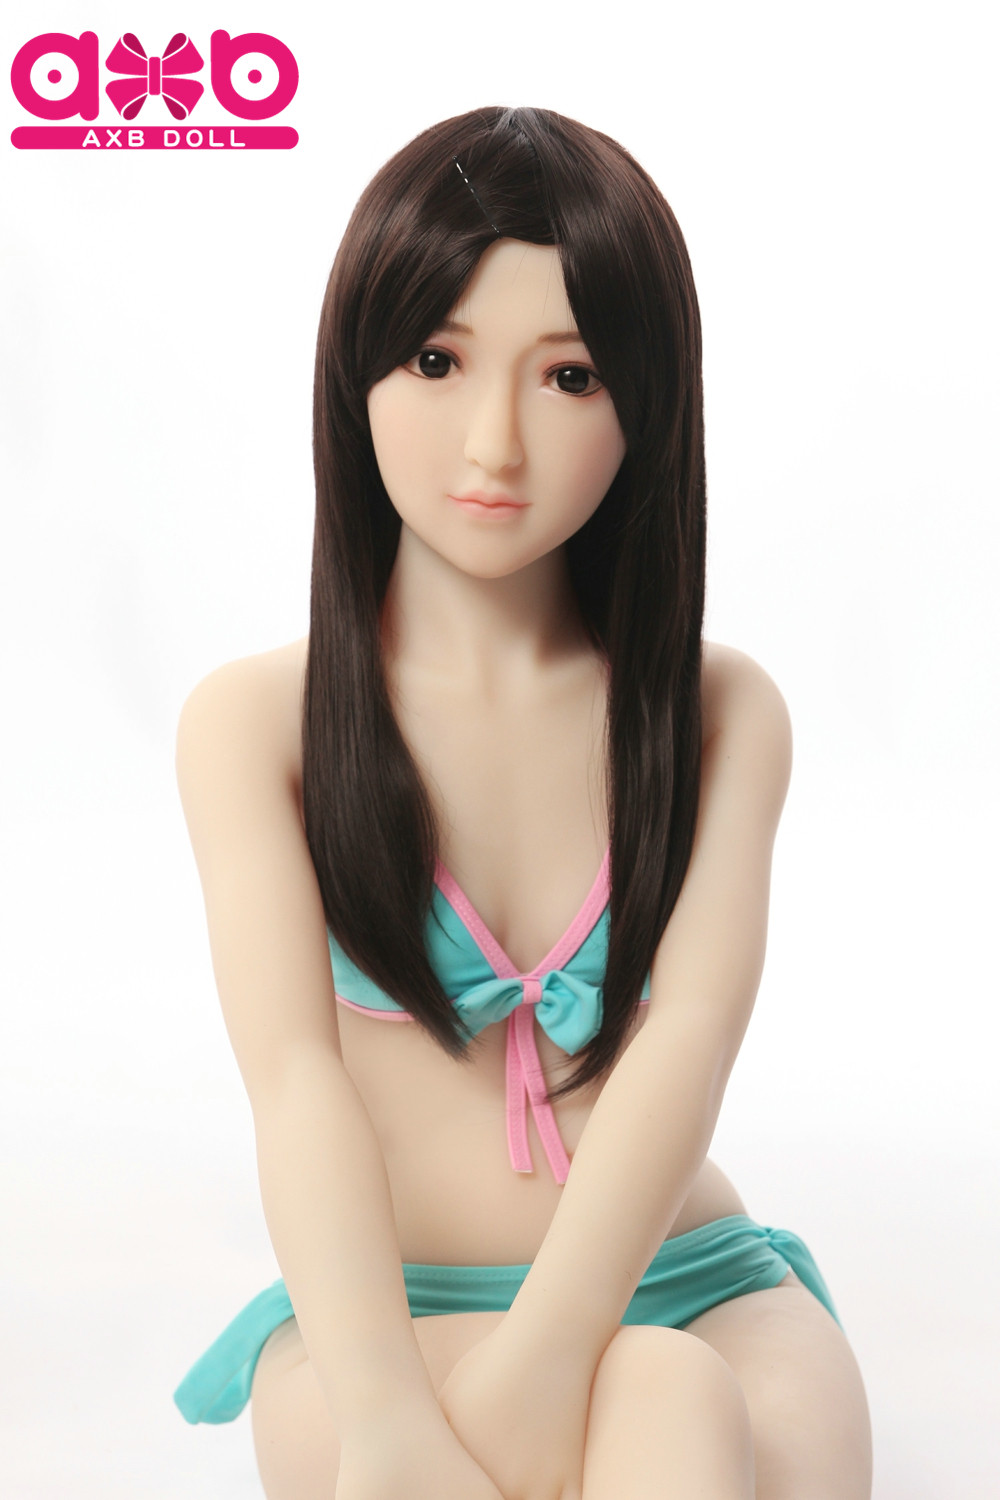 AXBDOLL A16# TPE Anime Love Doll - 画像をクリックして閉じます